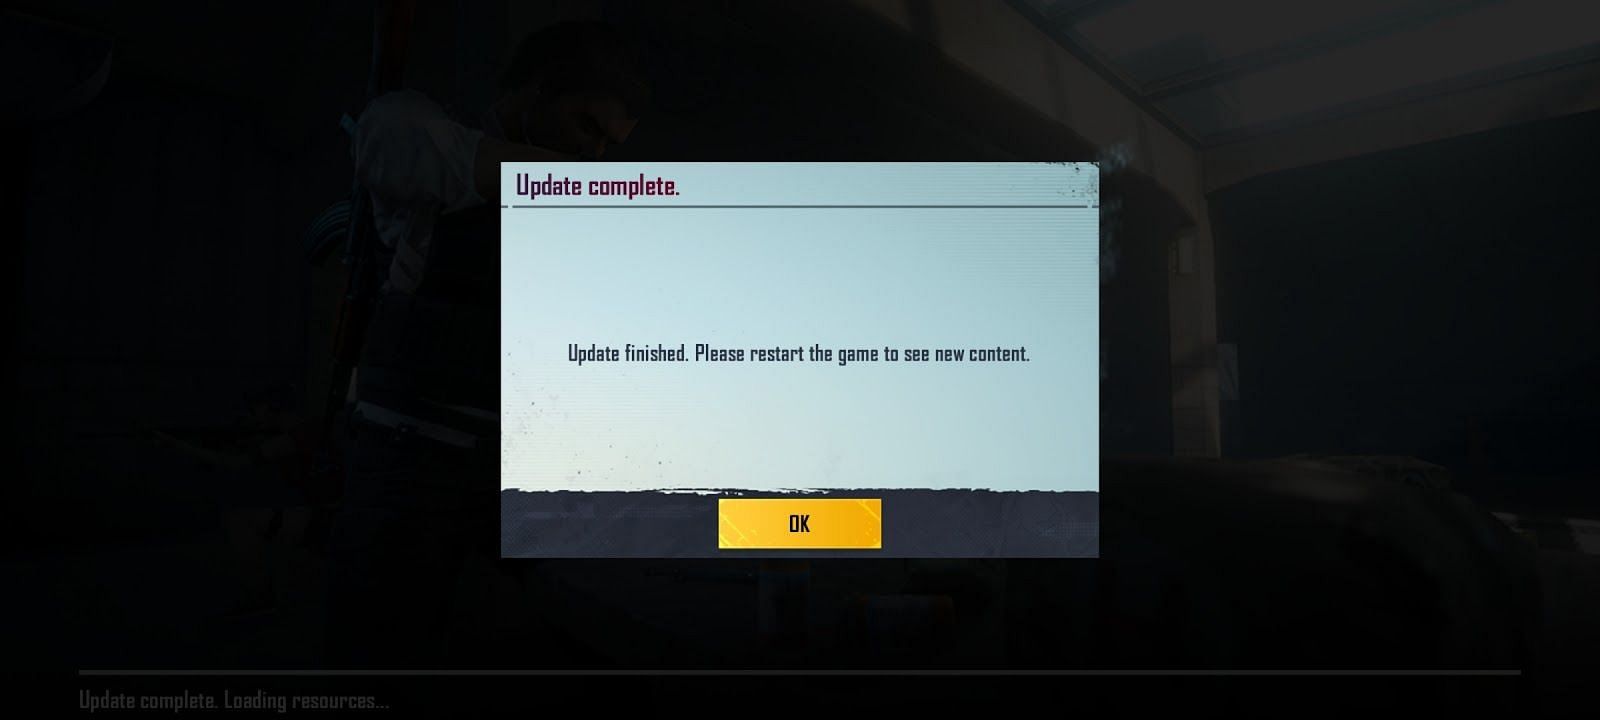 Restart the game to see the new content of the game (Image via PUBG Mobile)